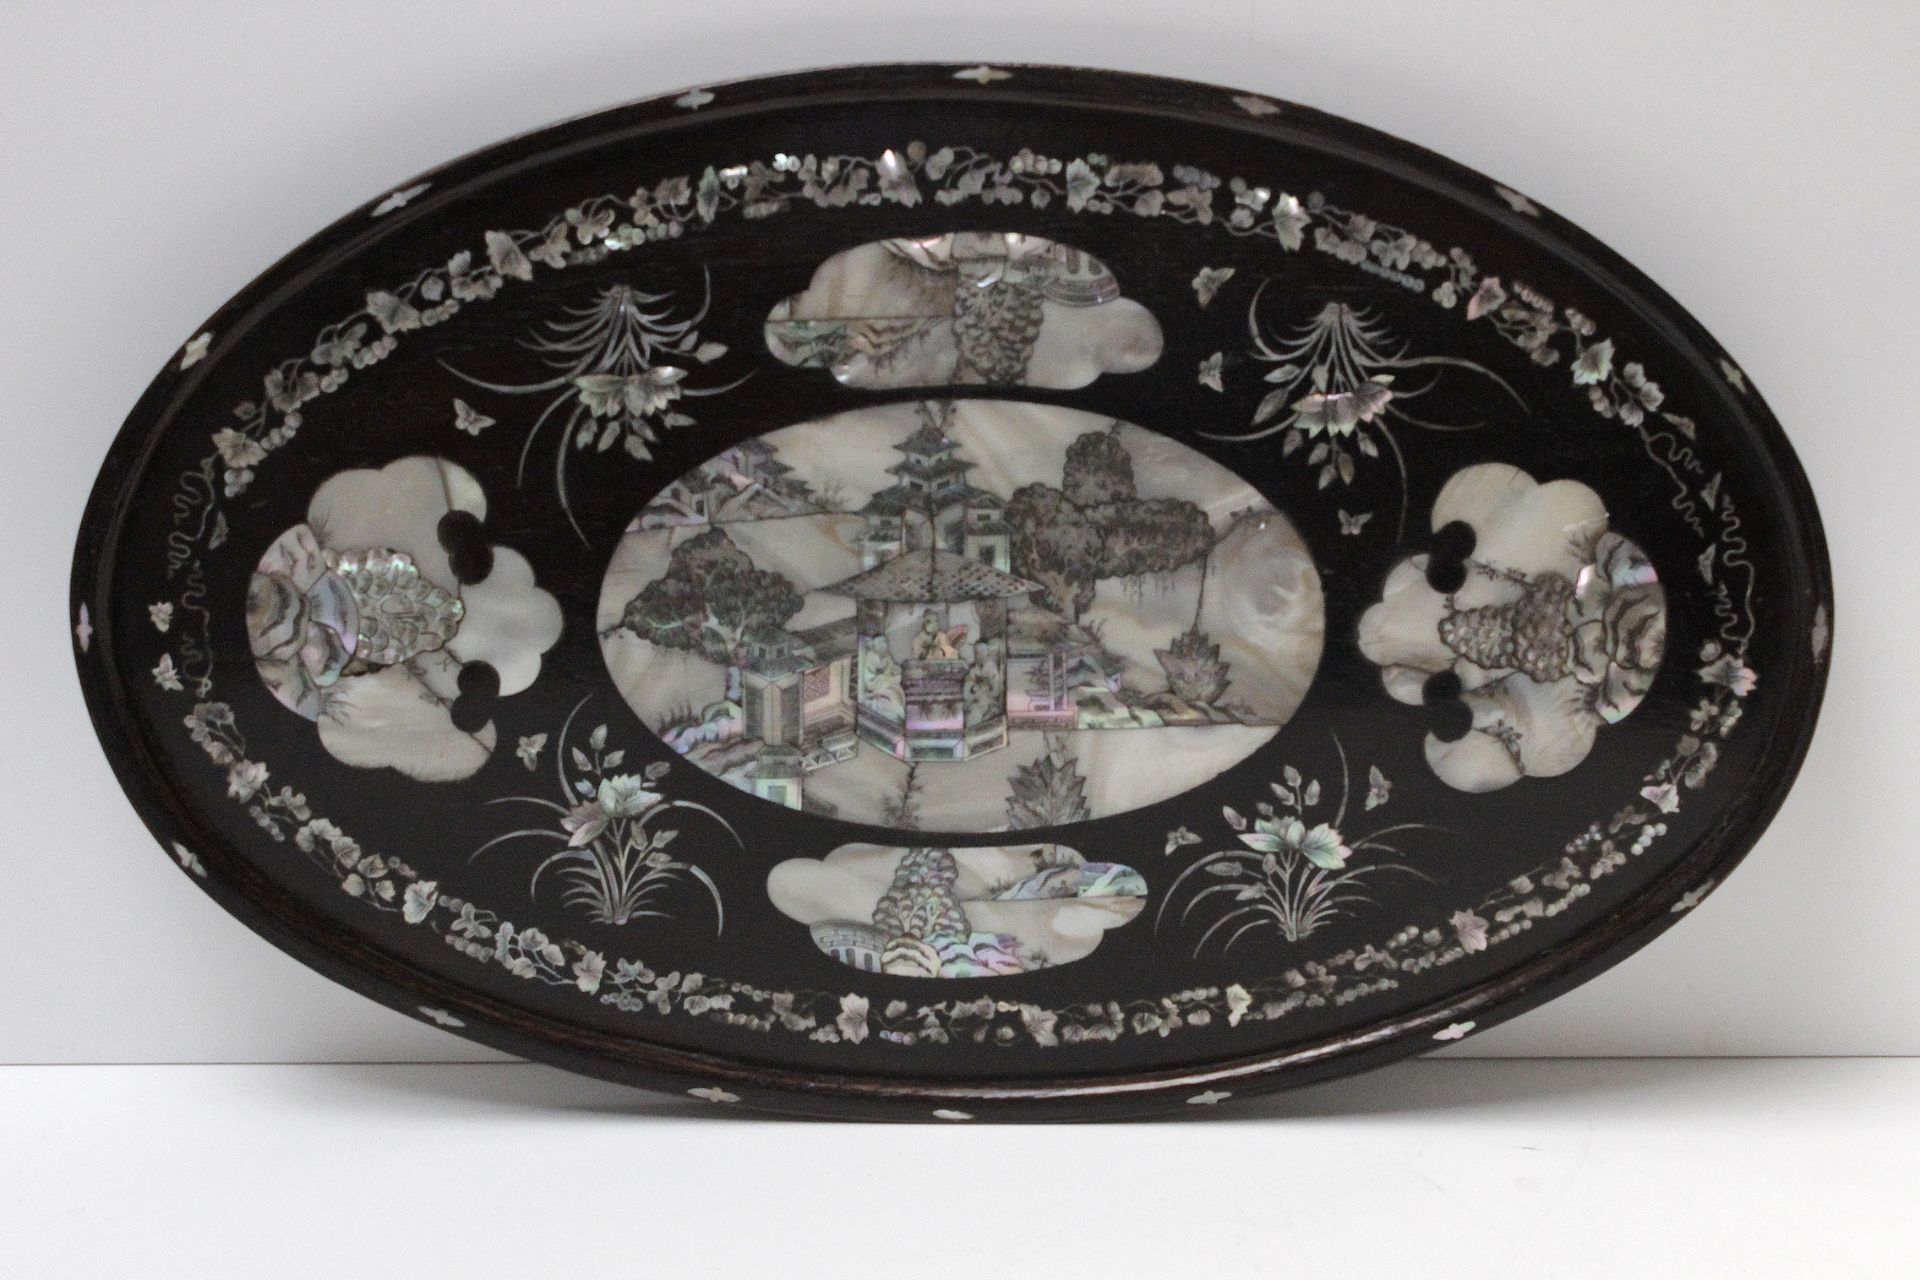 A Chinese serving tray circa 1900 in lacquered wood and mother of pearl inlays